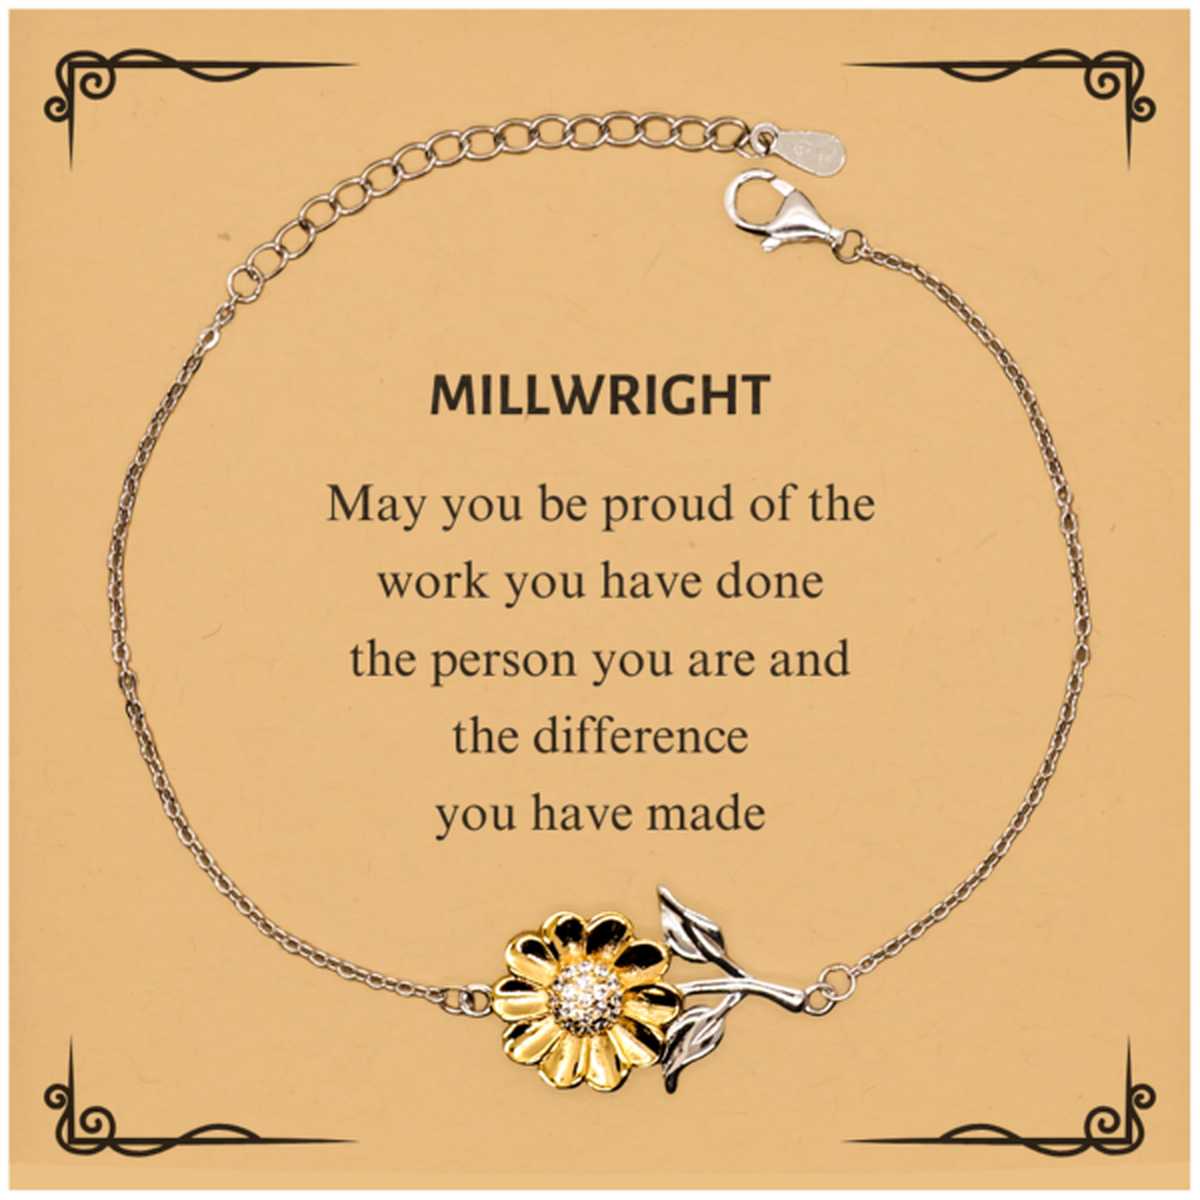 Millwright May you be proud of the work you have done, Retirement Millwright Sunflower Bracelet for Colleague Appreciation Gifts Amazing for Millwright